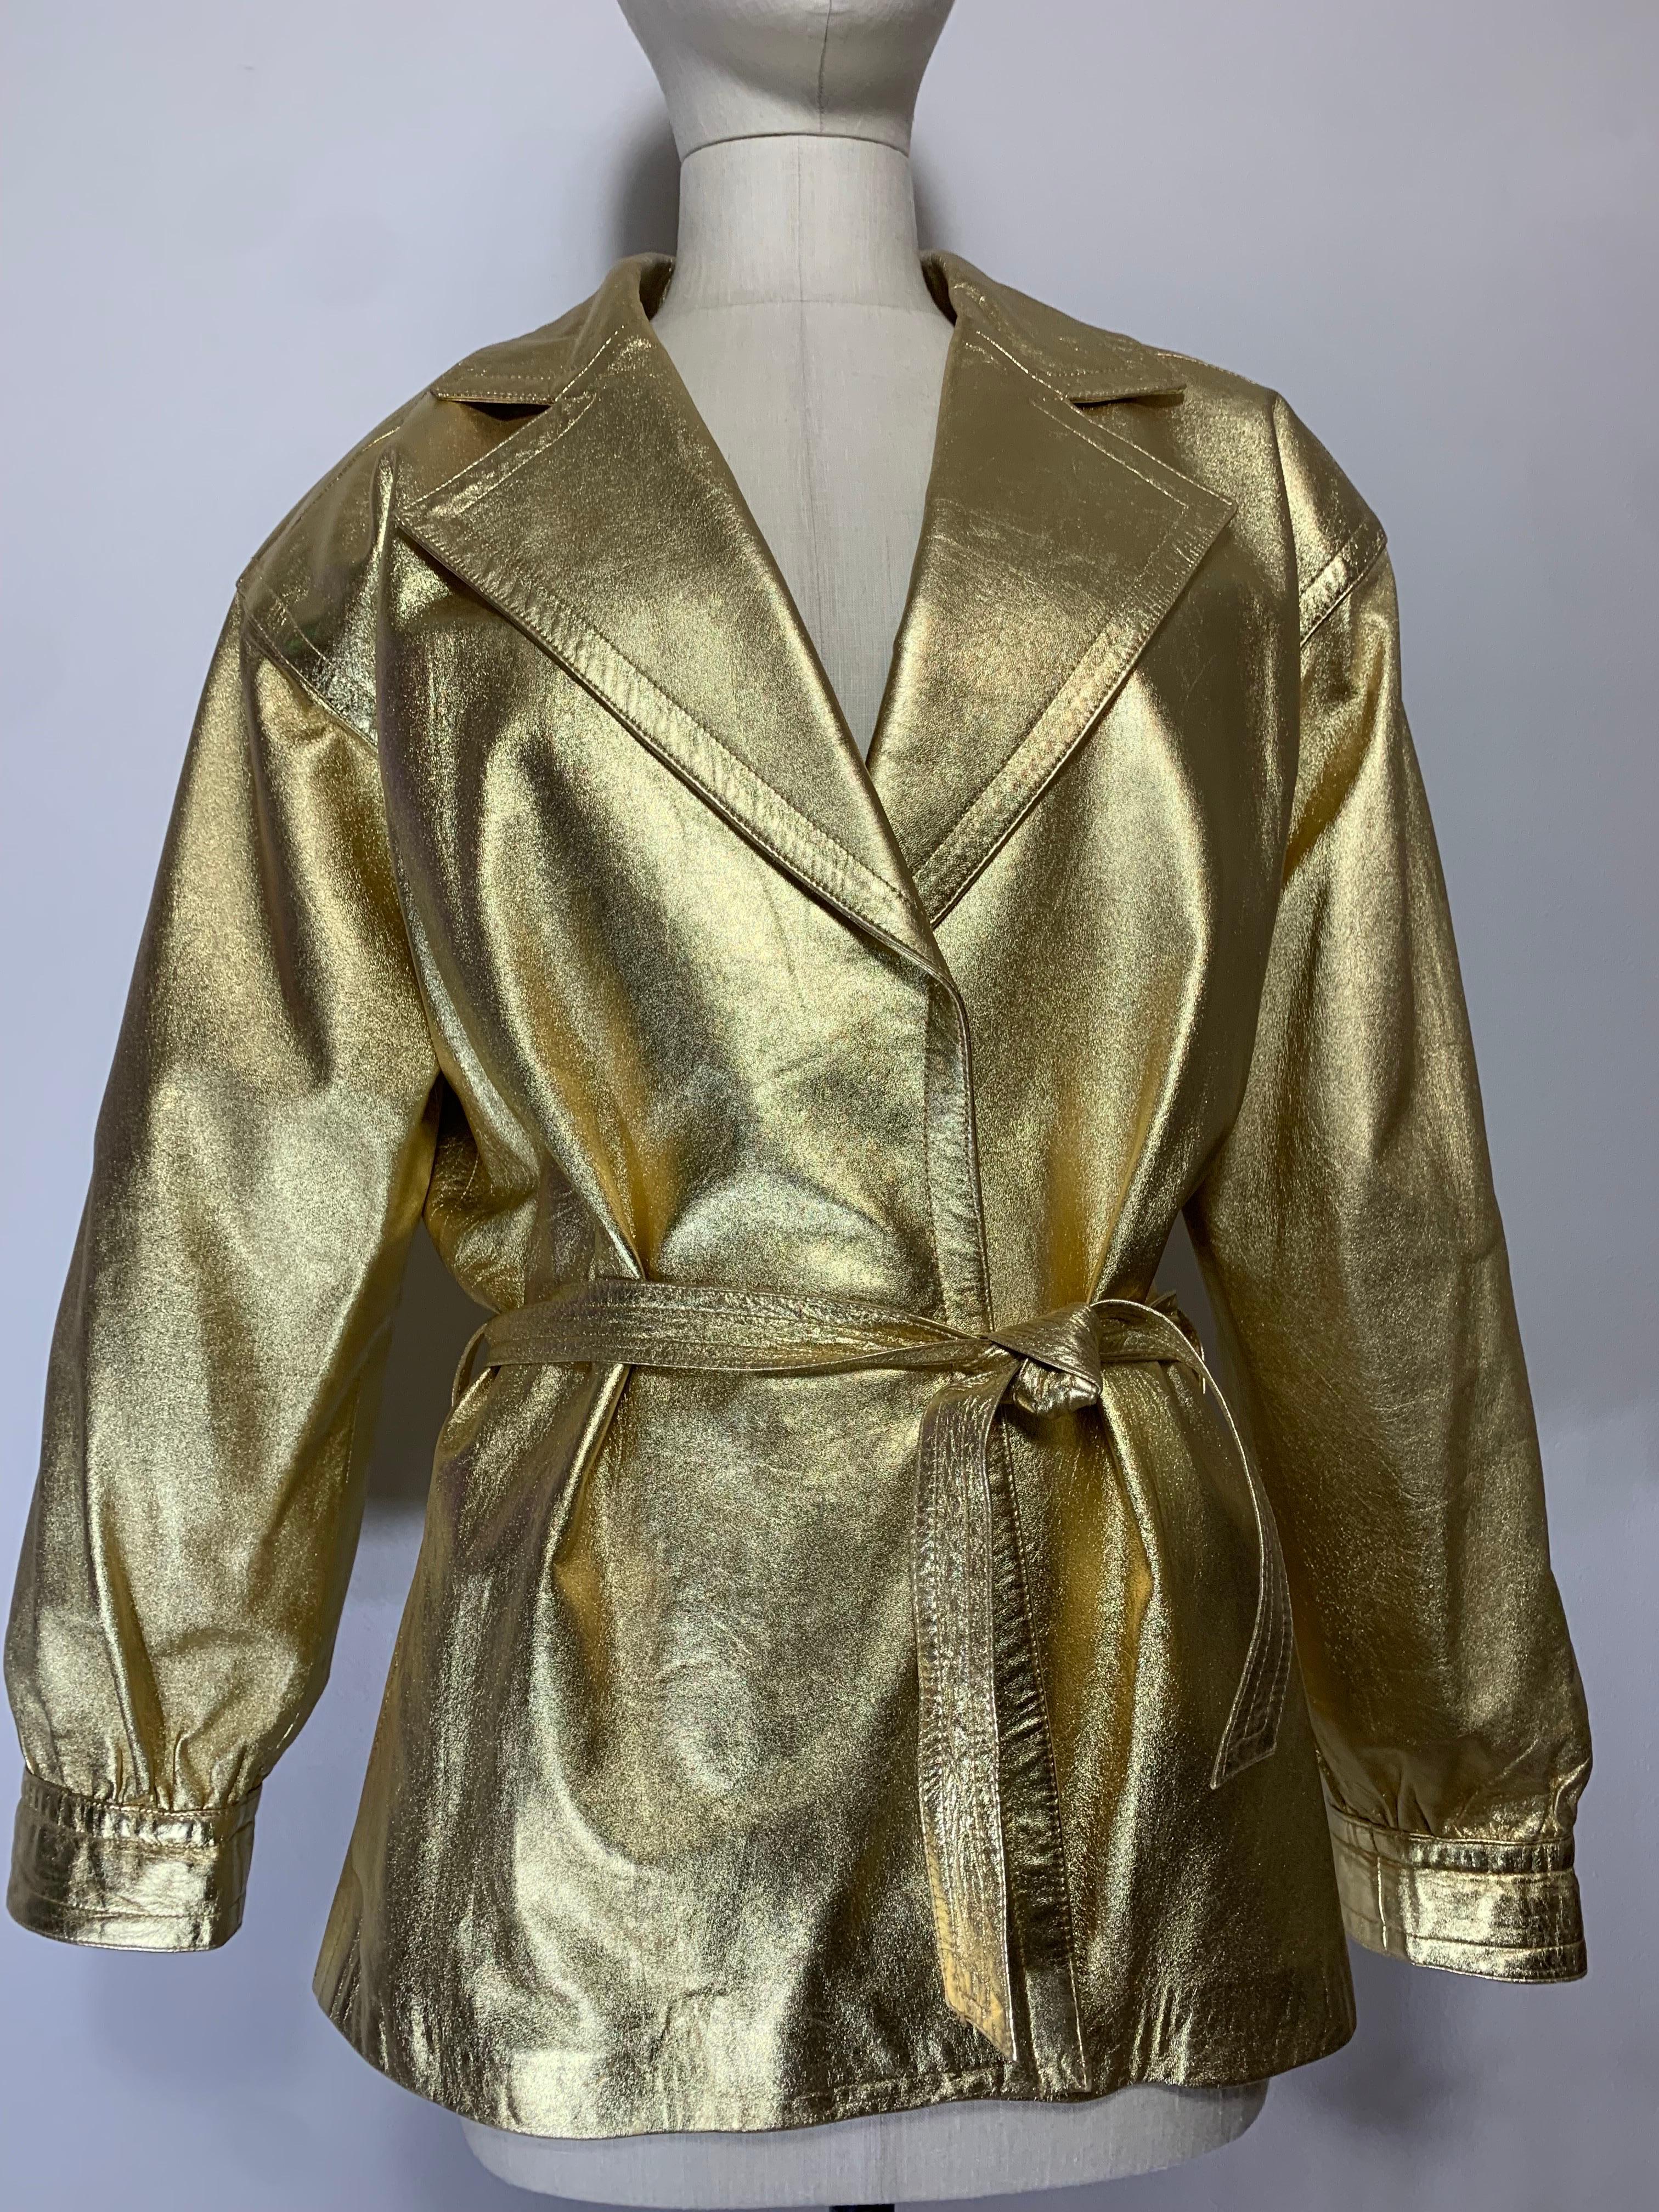 1980s Saint Laurent Gold Soft and Supple Leather Hip-Length Trench Coat In An Oversized Style w Matching Belt Tie:  Large notched collar, banded cuffs, gathered sleeves. No closures and belt tie. Gold satin lining. Size EU 40. 